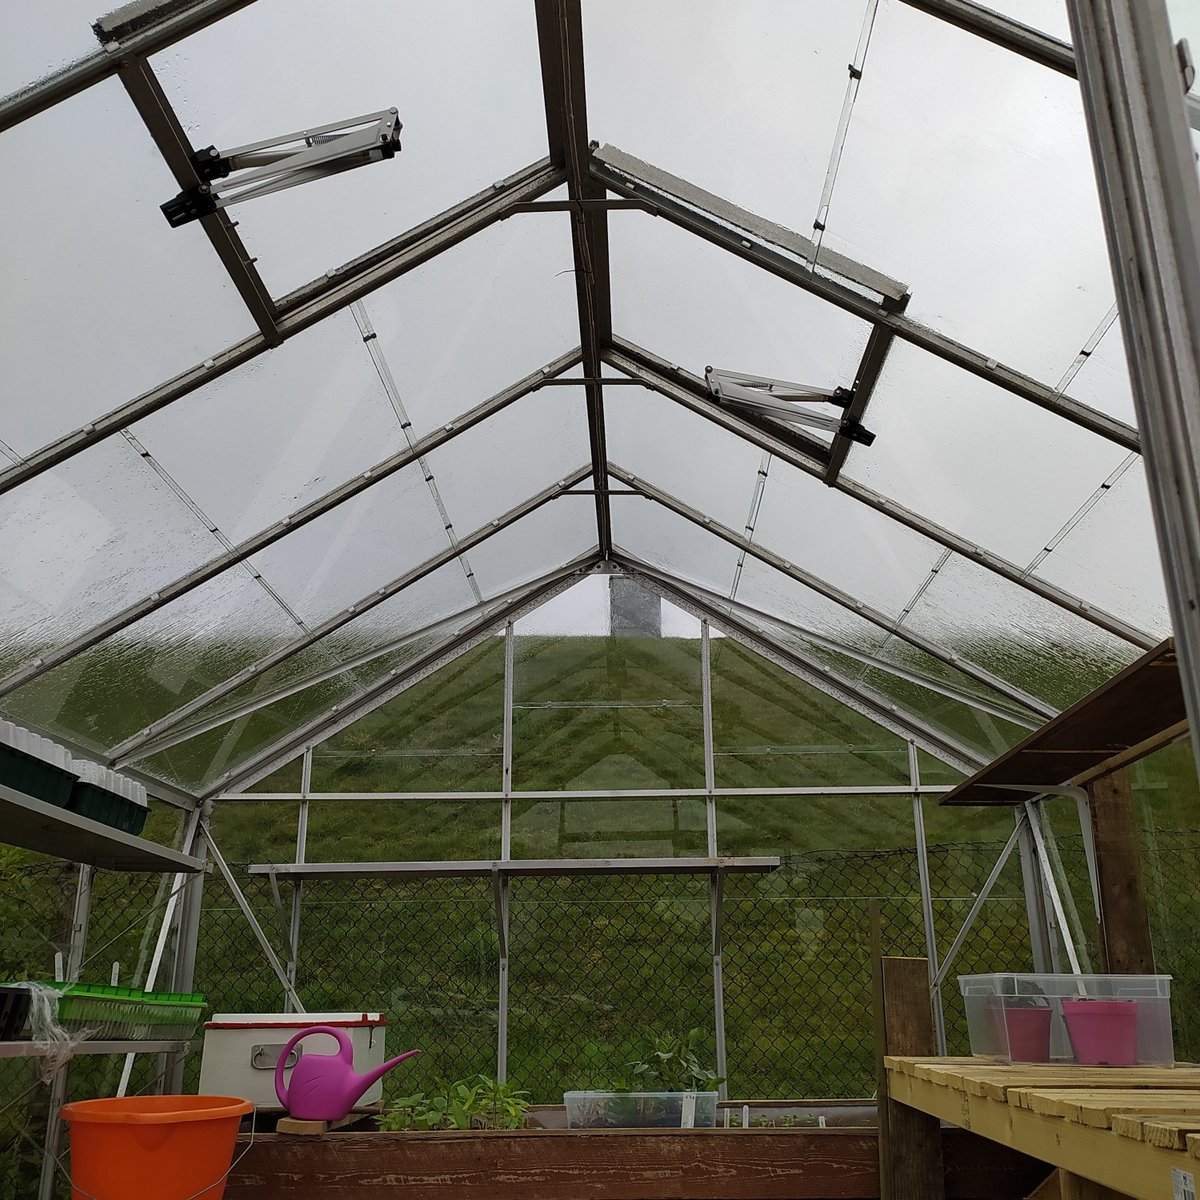 Lots of work being done for our upcoming plant sale on 20th/21st May. Post holes were dug for our new noticeboard. Ventilators fitted to our community greenhouse. Thank you to all our volunteers rewarded with cake and a cuppa. #allotment #slopefield #community #plantsale